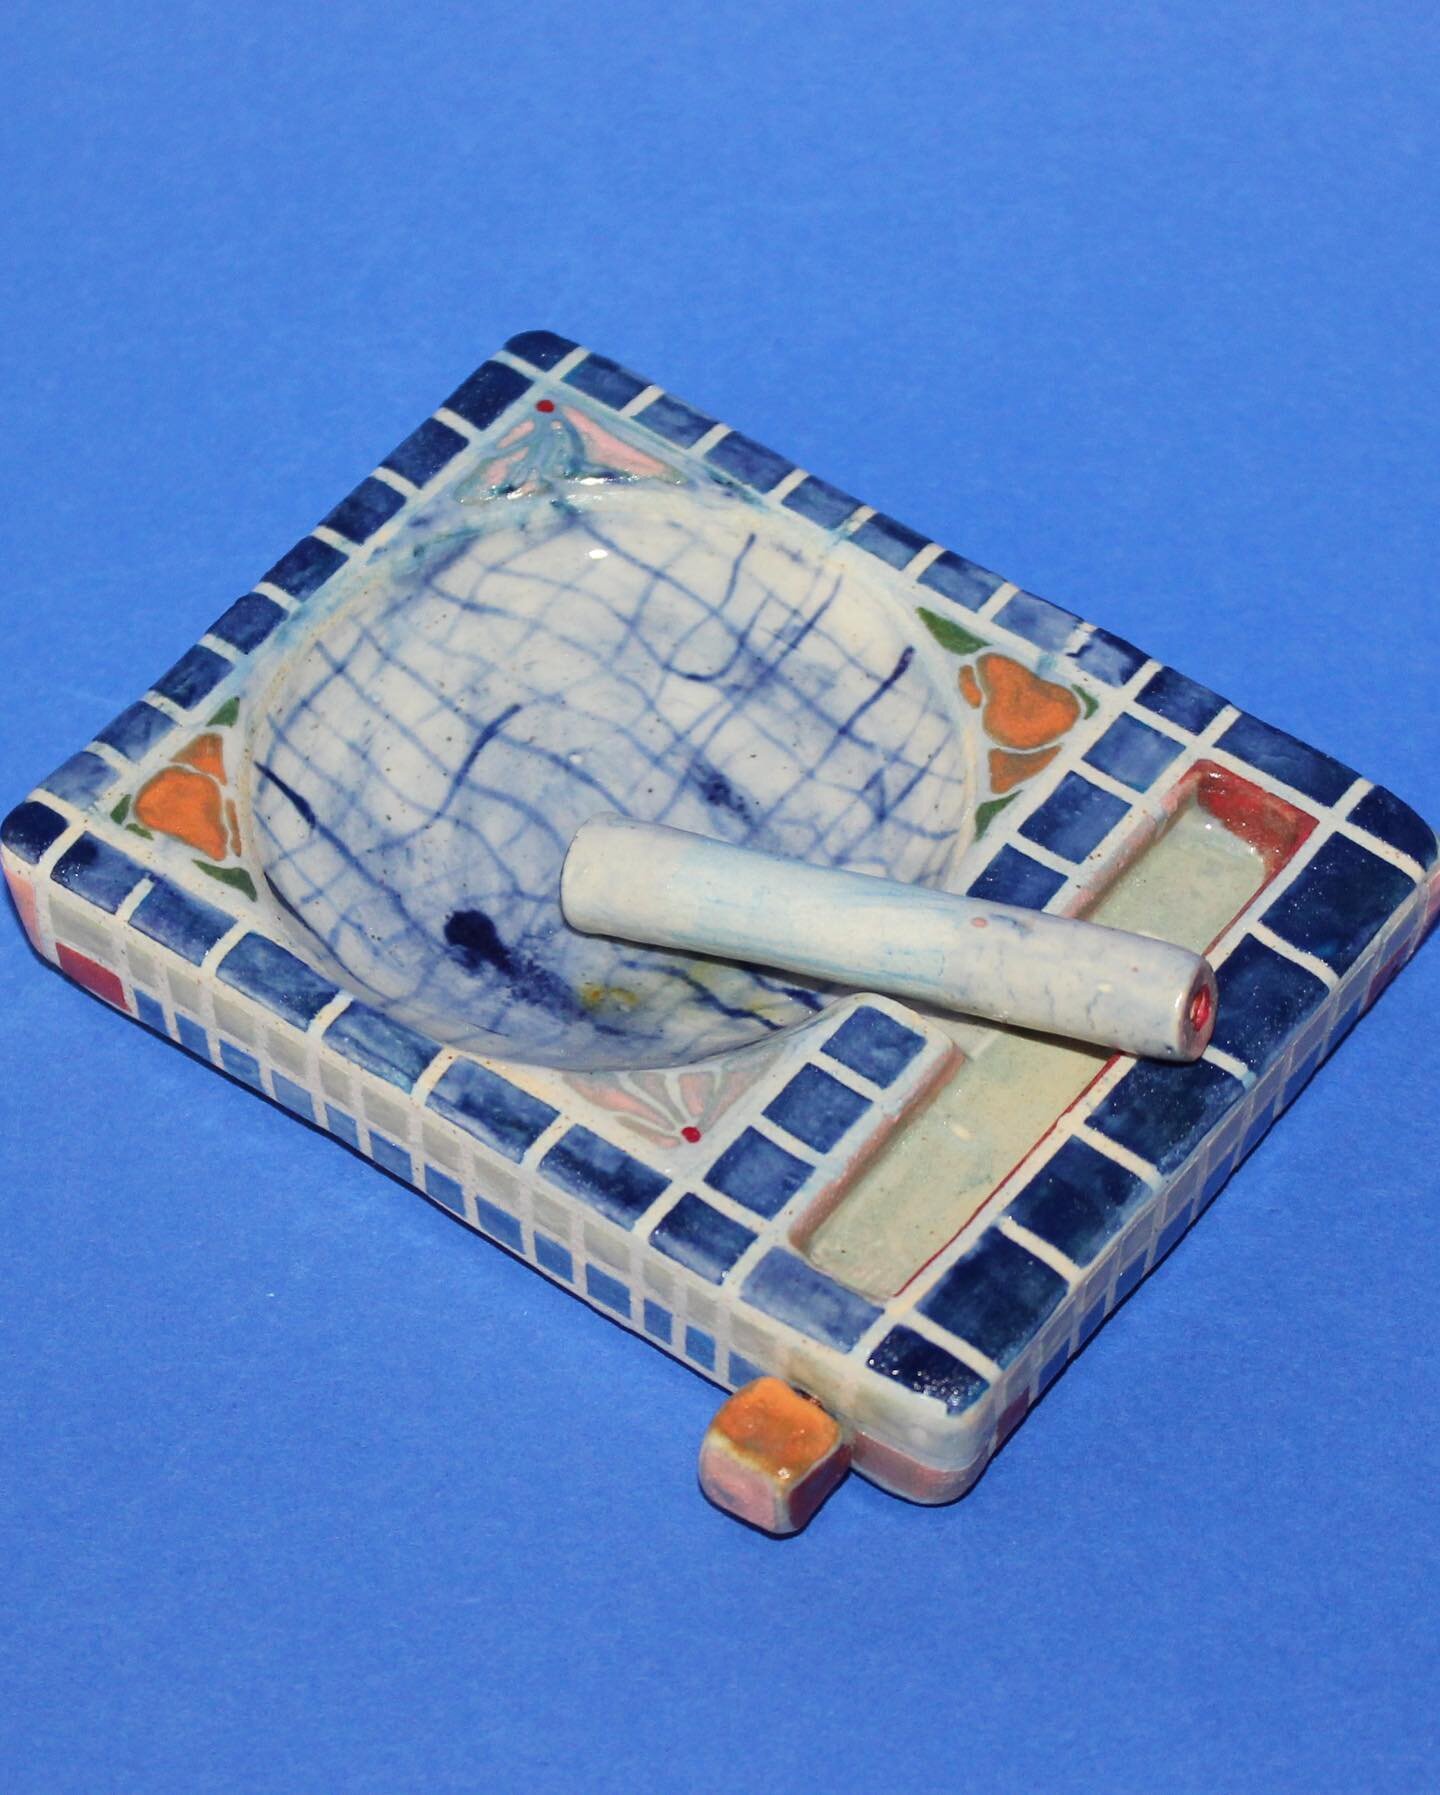 Sardinia Ashtray Set: ashtray, one hitter and cocktail pick stored in the side for emptying the one hitter 💙 
available @ 4:30pm
I&rsquo;ve never been to Sardinia but when I paint, I dream 🌊💭🌺 + a 2021 l00k that feels dreaming